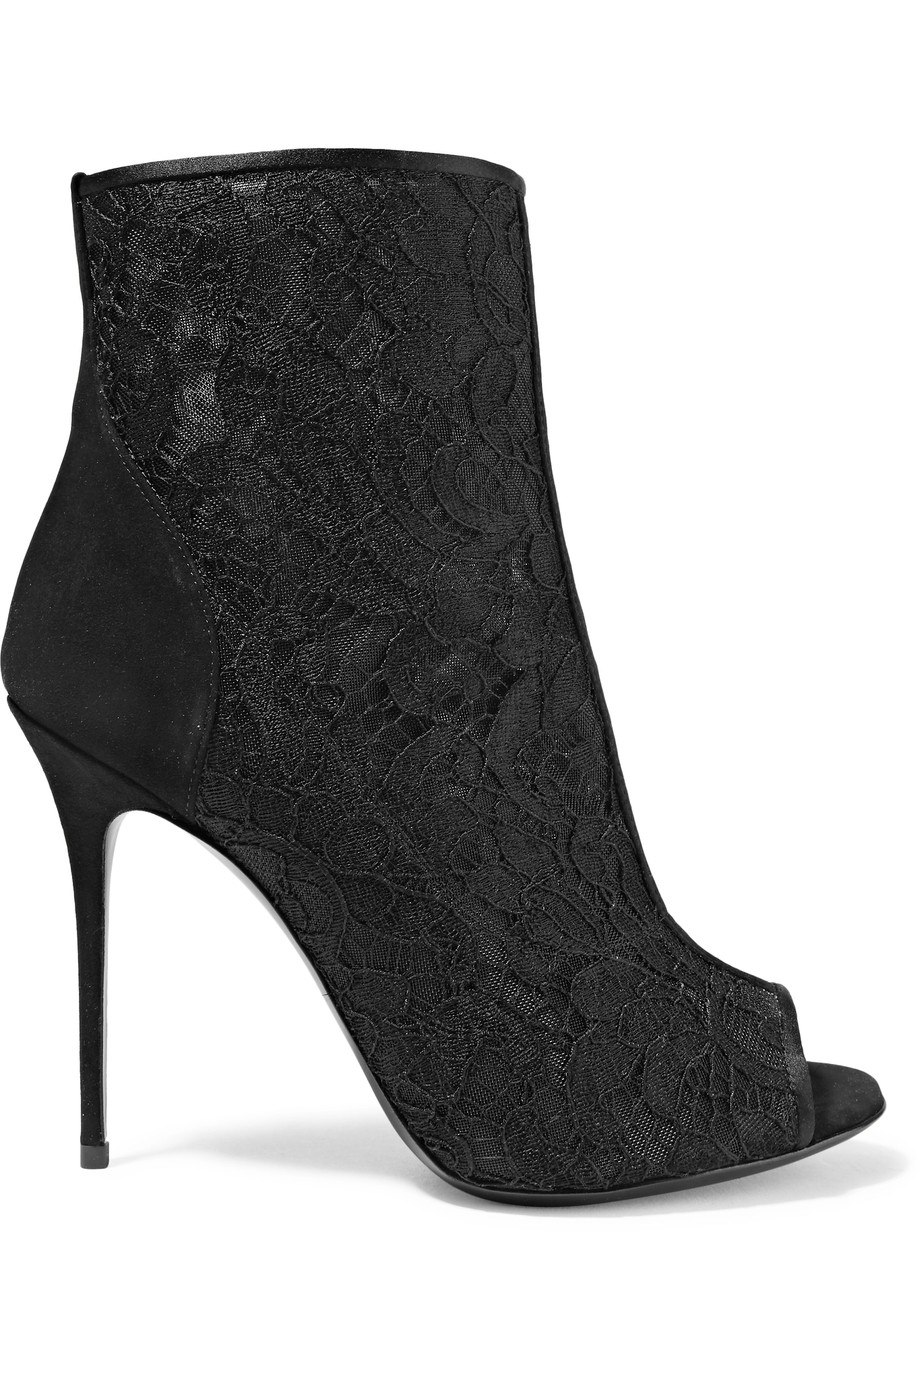 Giuseppe Zanotti Suede-paneled Corded Lace And Mesh Ankle Boots | ModeSens